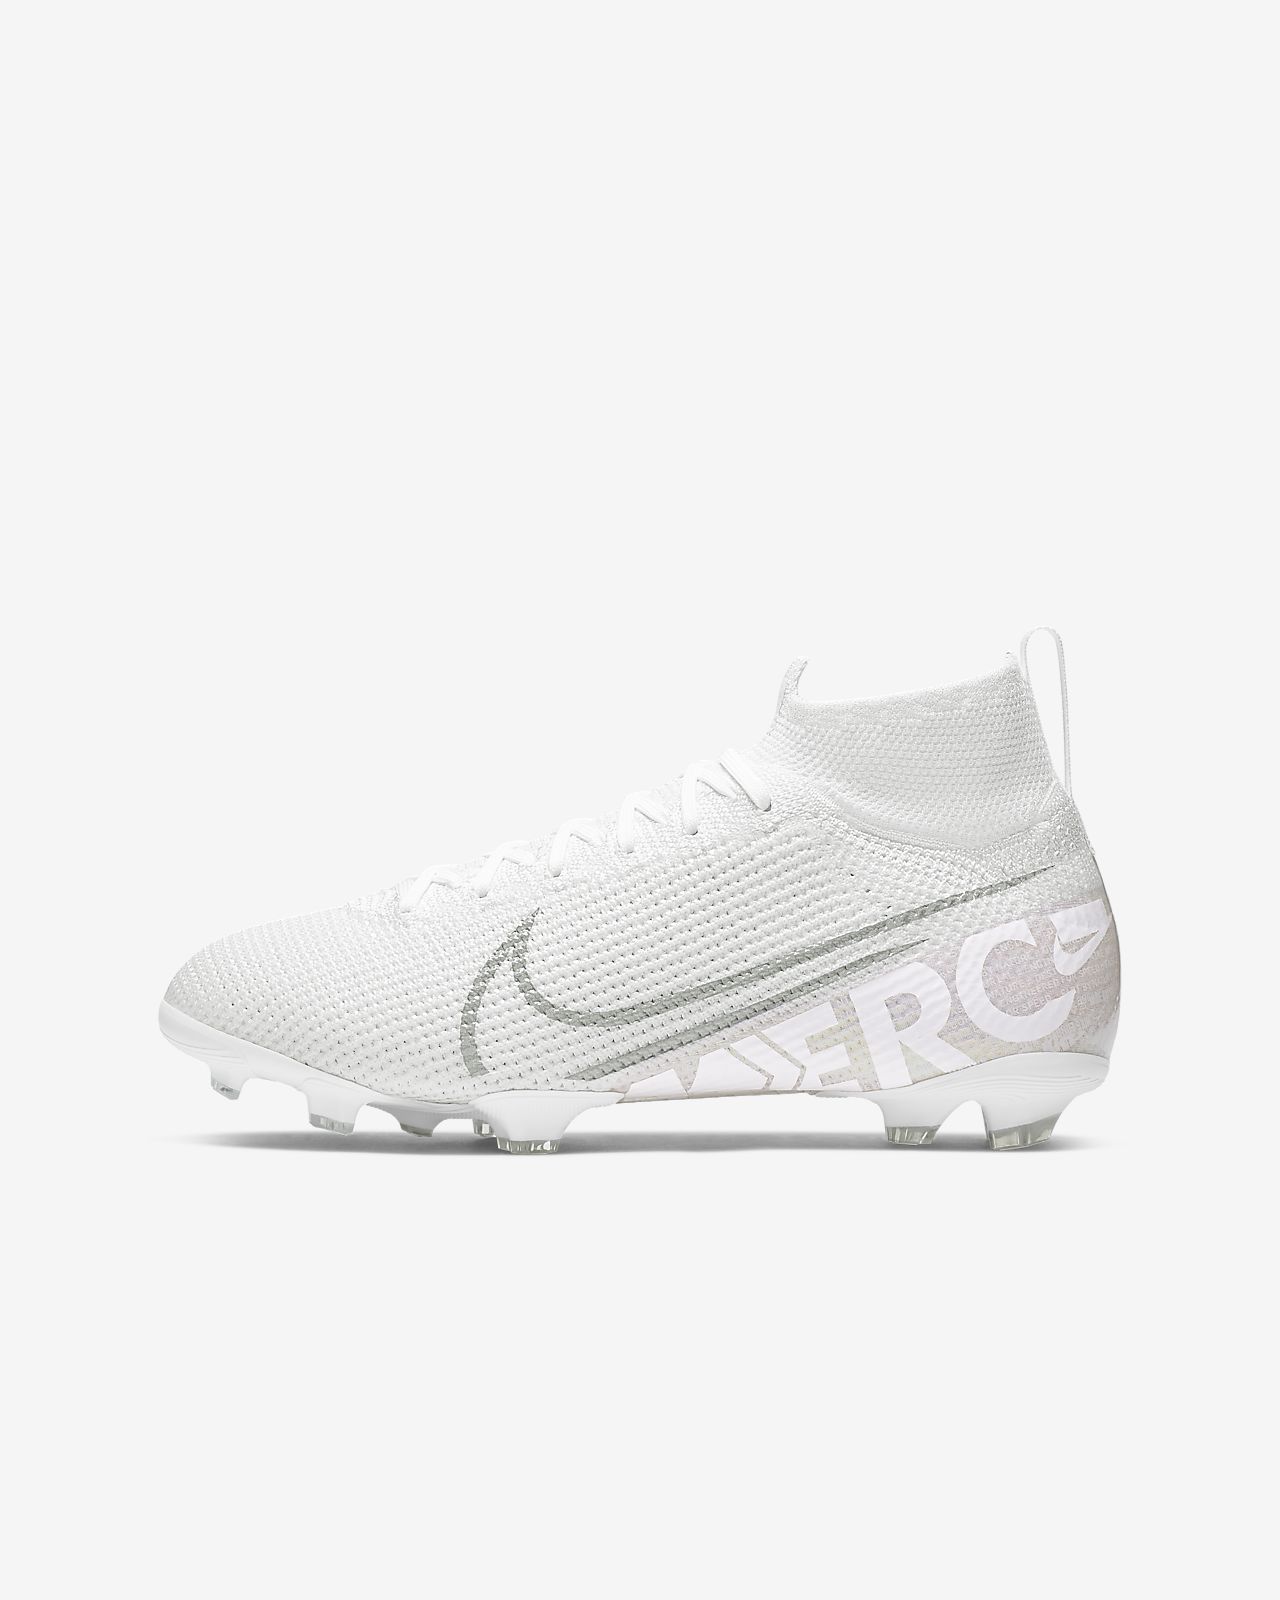 Nike Unisex Adults Mercurial Superfly 6 Elite FG Soccer Cleats